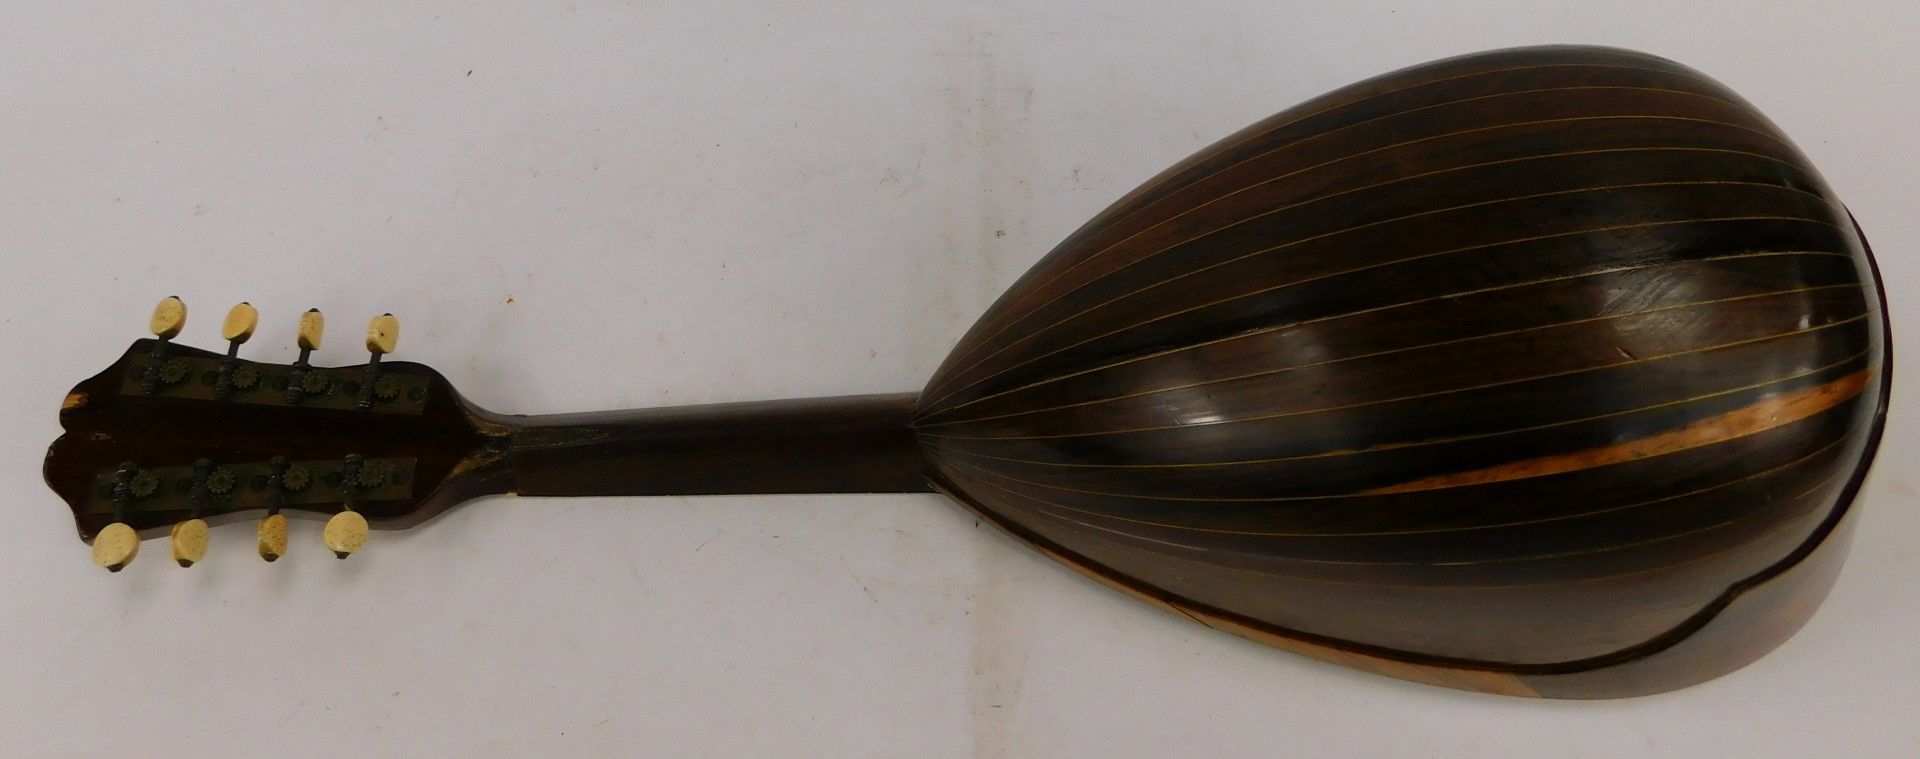 A Neopolitan mandolin, with tortoiseshell applied detail, with an ebonised stem and bone tuning pins - Image 5 of 8